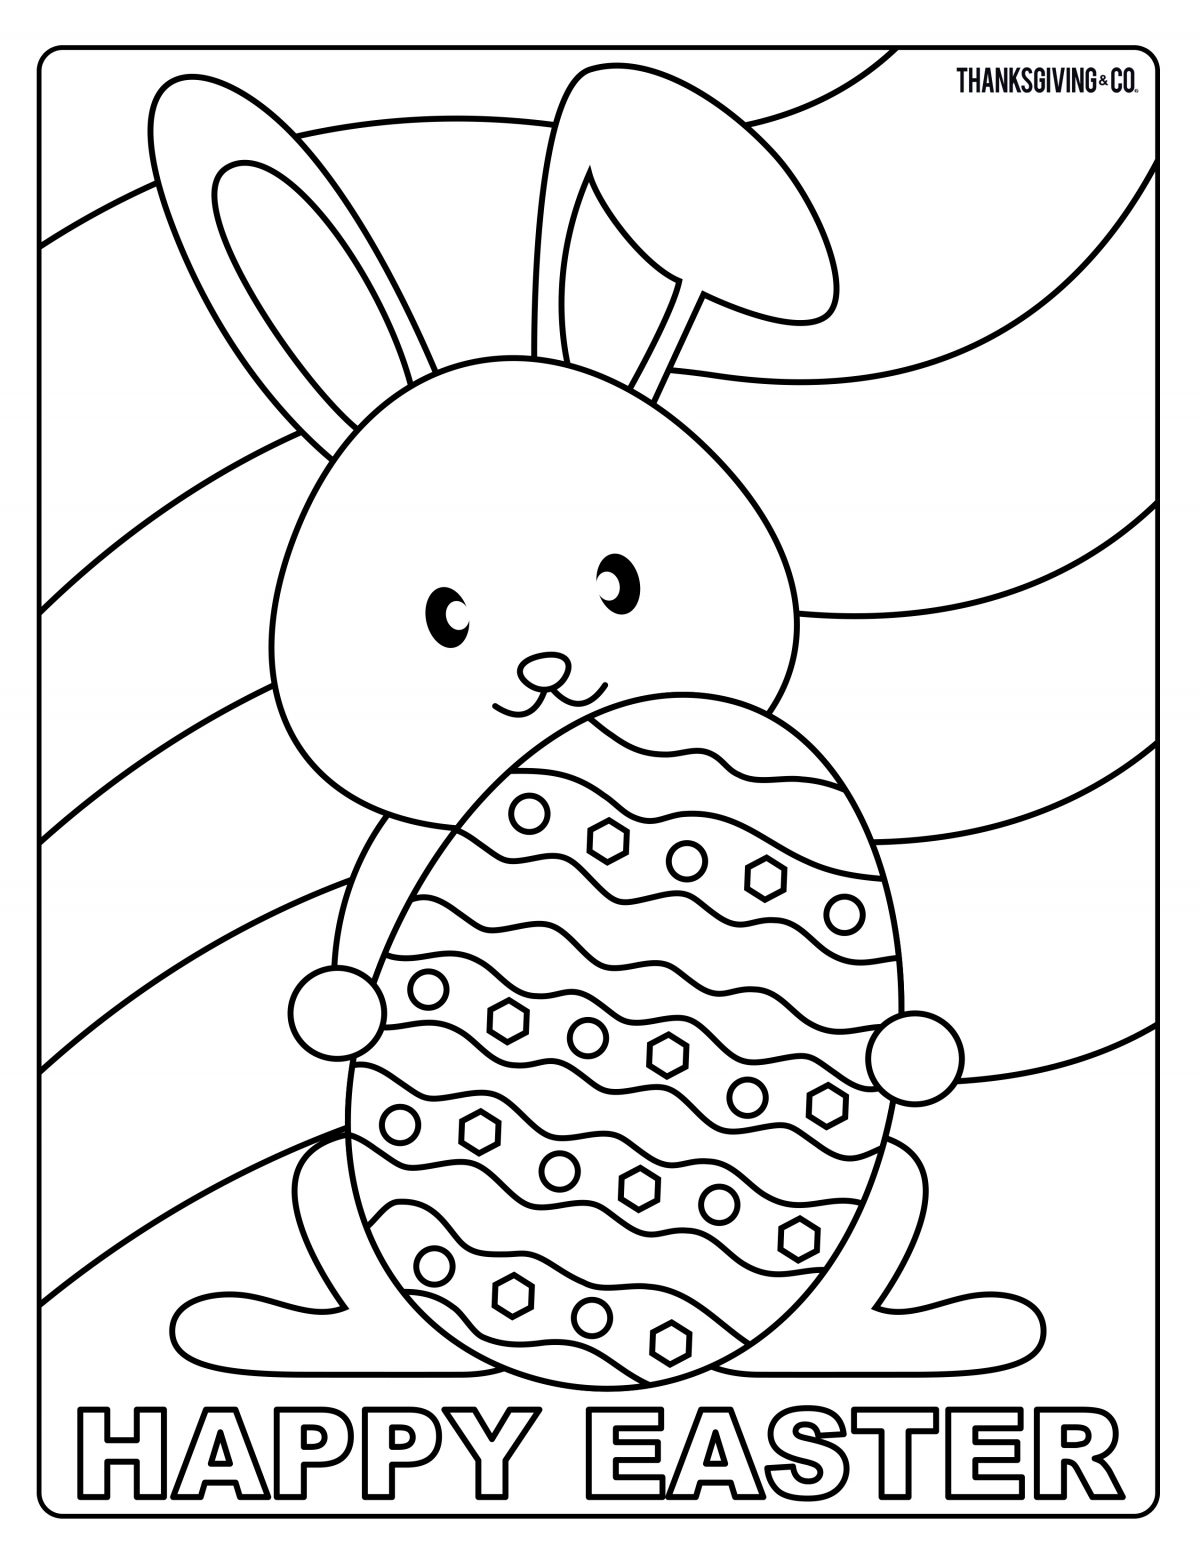 Easter Coloring page - Easter bunny